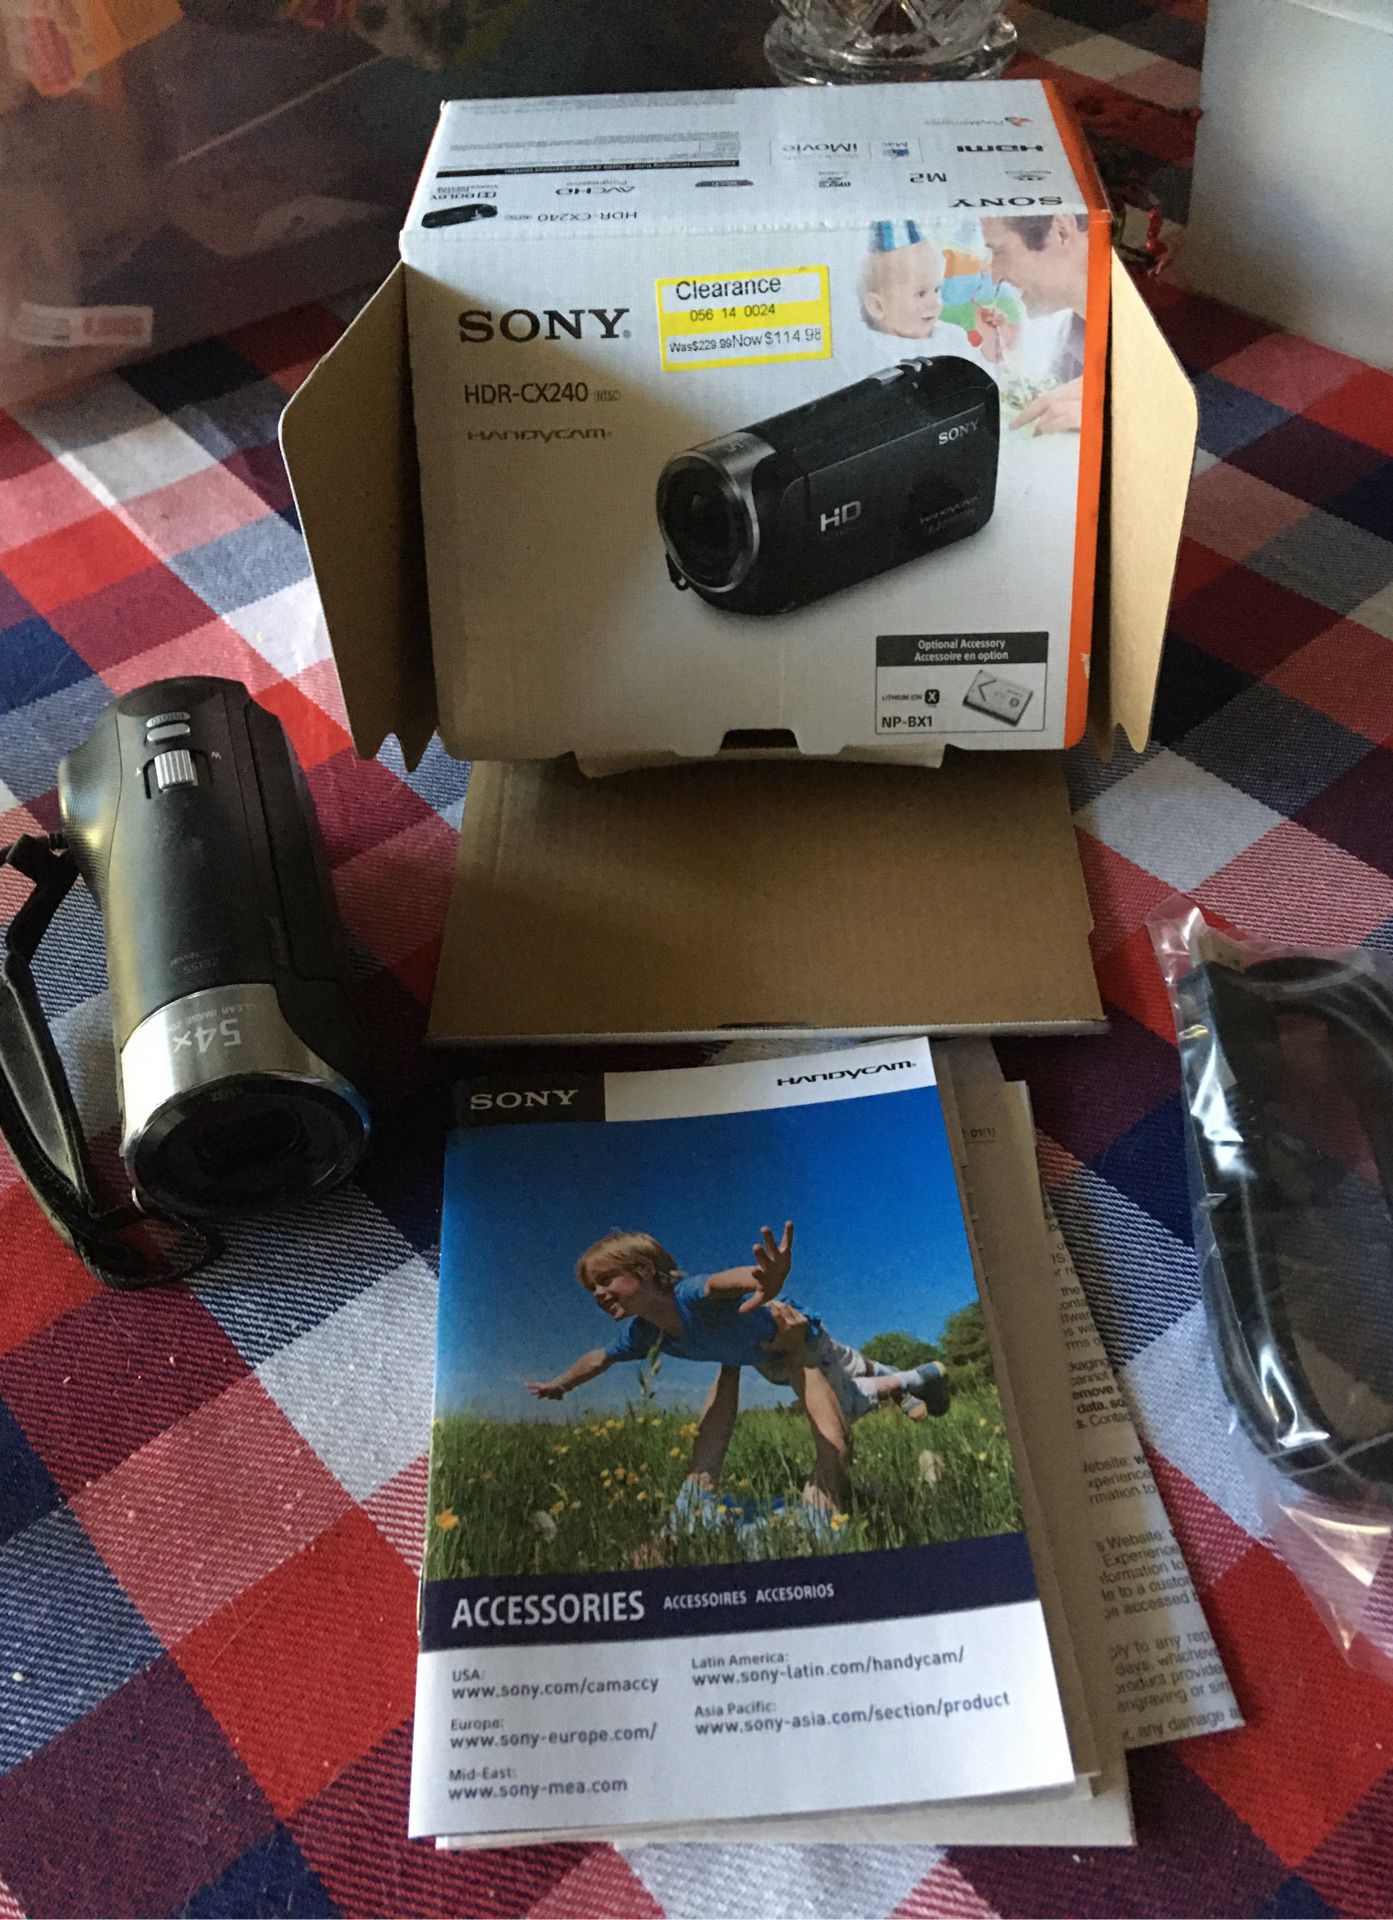 Sony HDR-CX240 handy cam camcorder